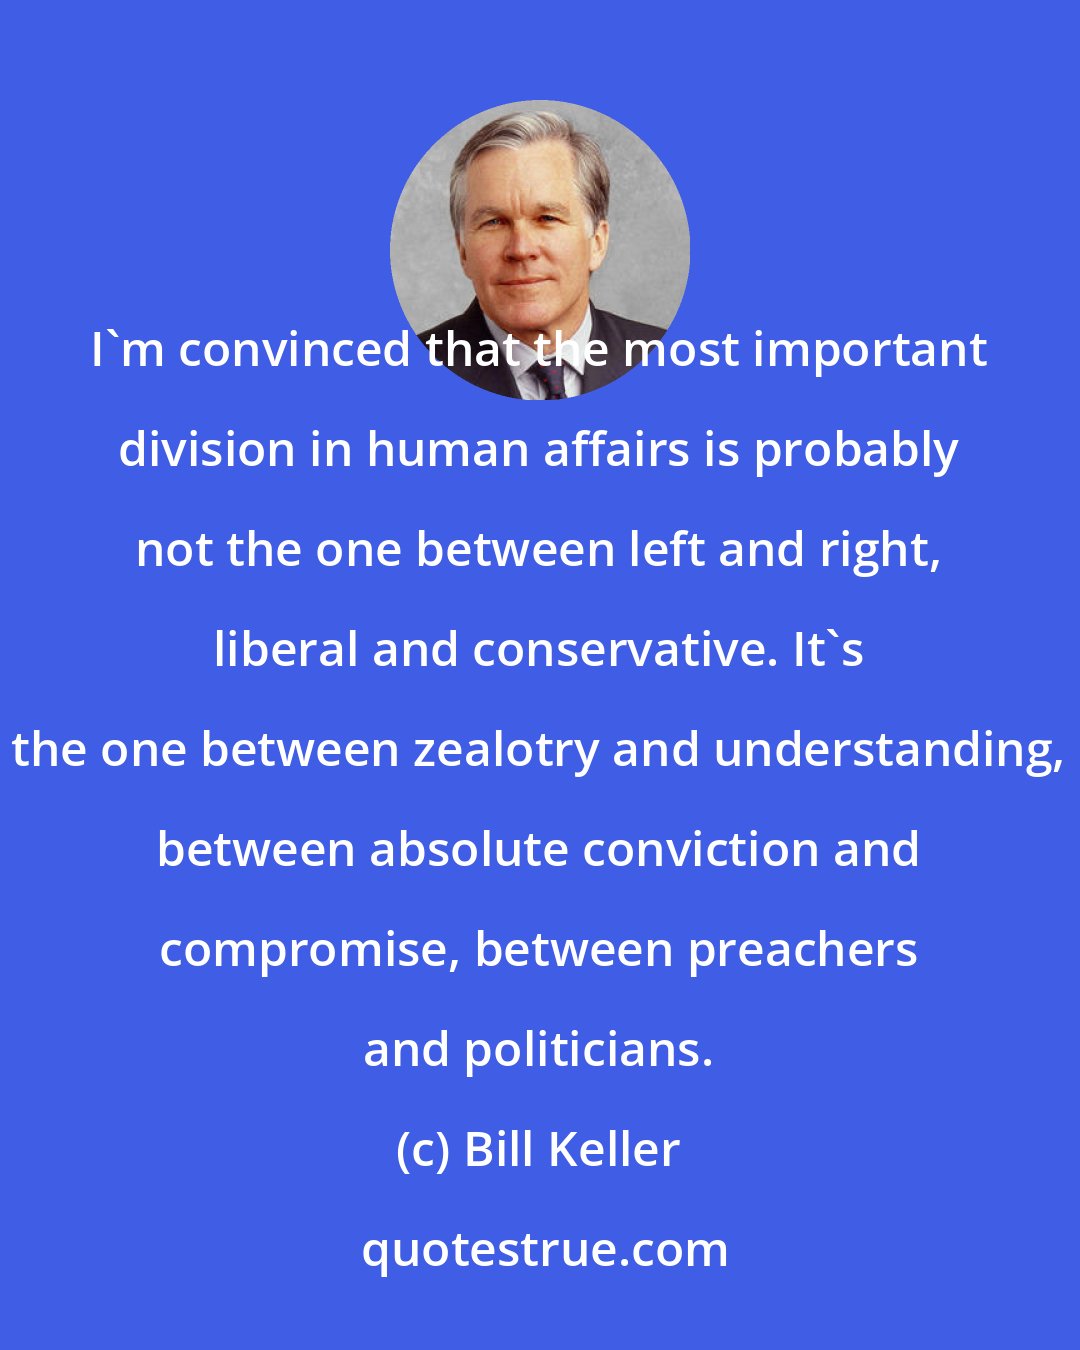 Bill Keller: I'm convinced that the most important division in human affairs is probably not the one between left and right, liberal and conservative. It's the one between zealotry and understanding, between absolute conviction and compromise, between preachers and politicians.